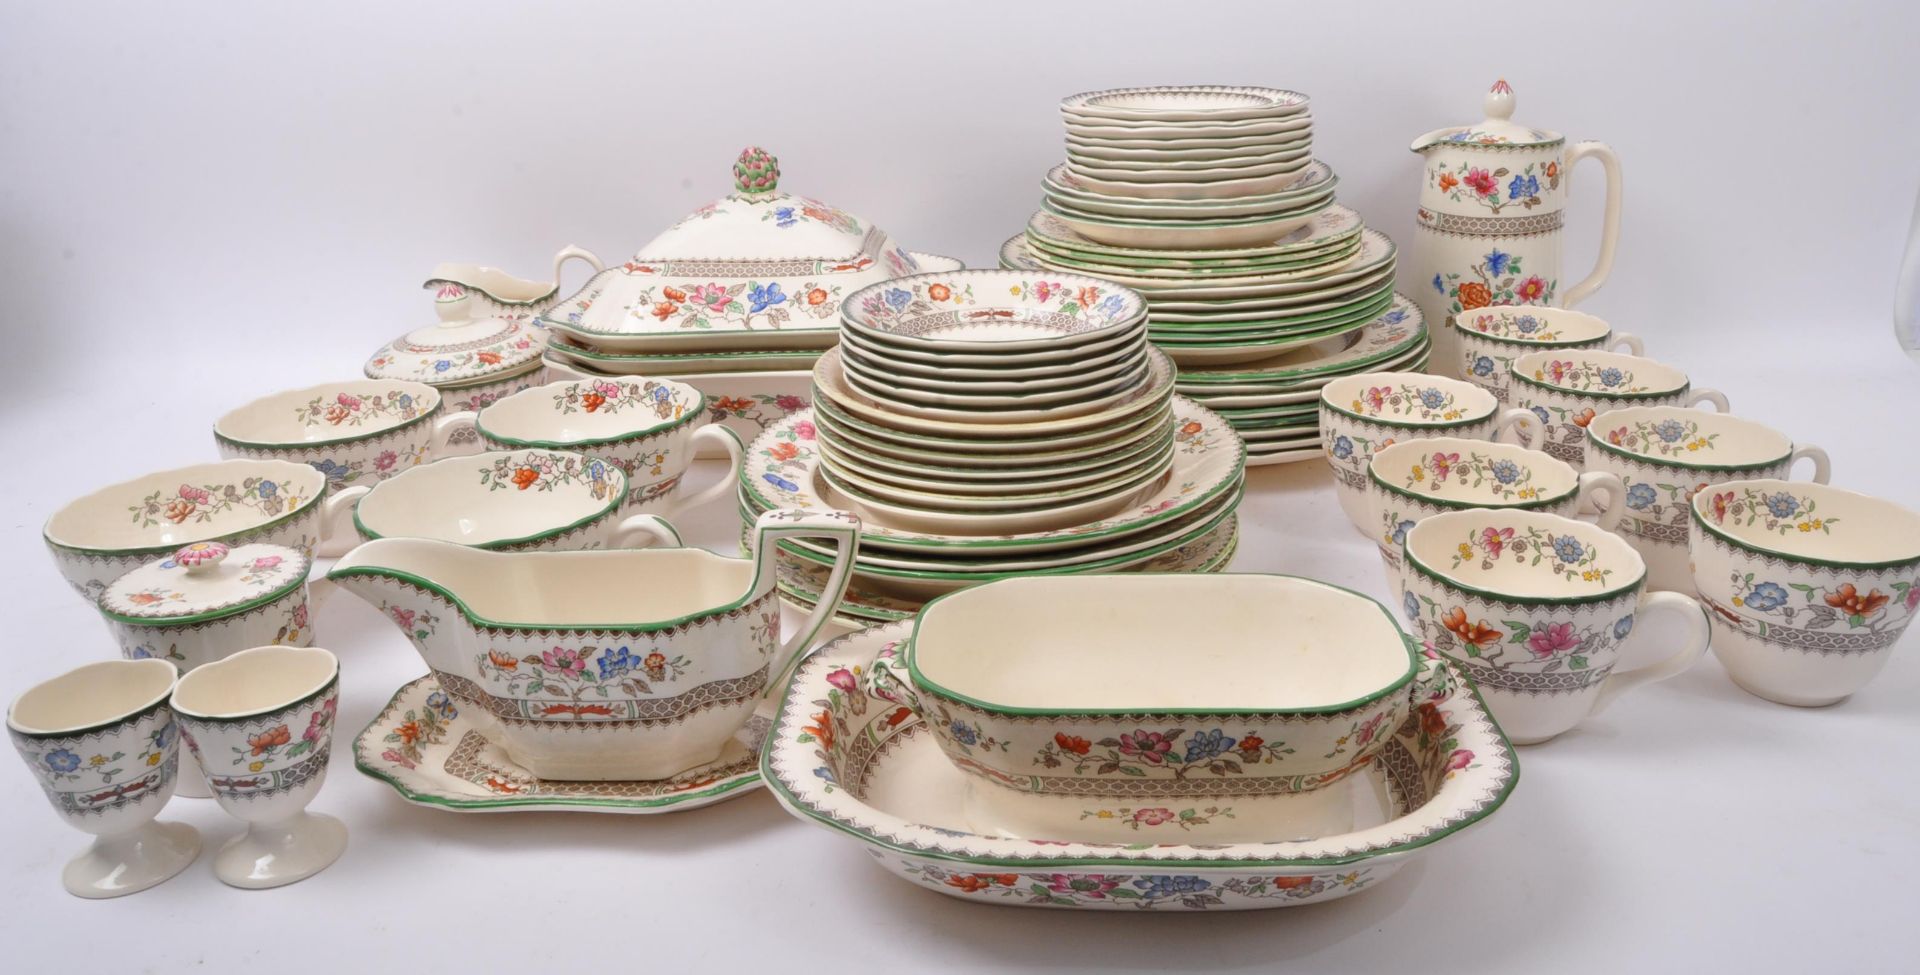 EARLY 20TH CENTURY COPELAND SPODE 'CHINESE ROSE' DINNERWARE - Image 2 of 8